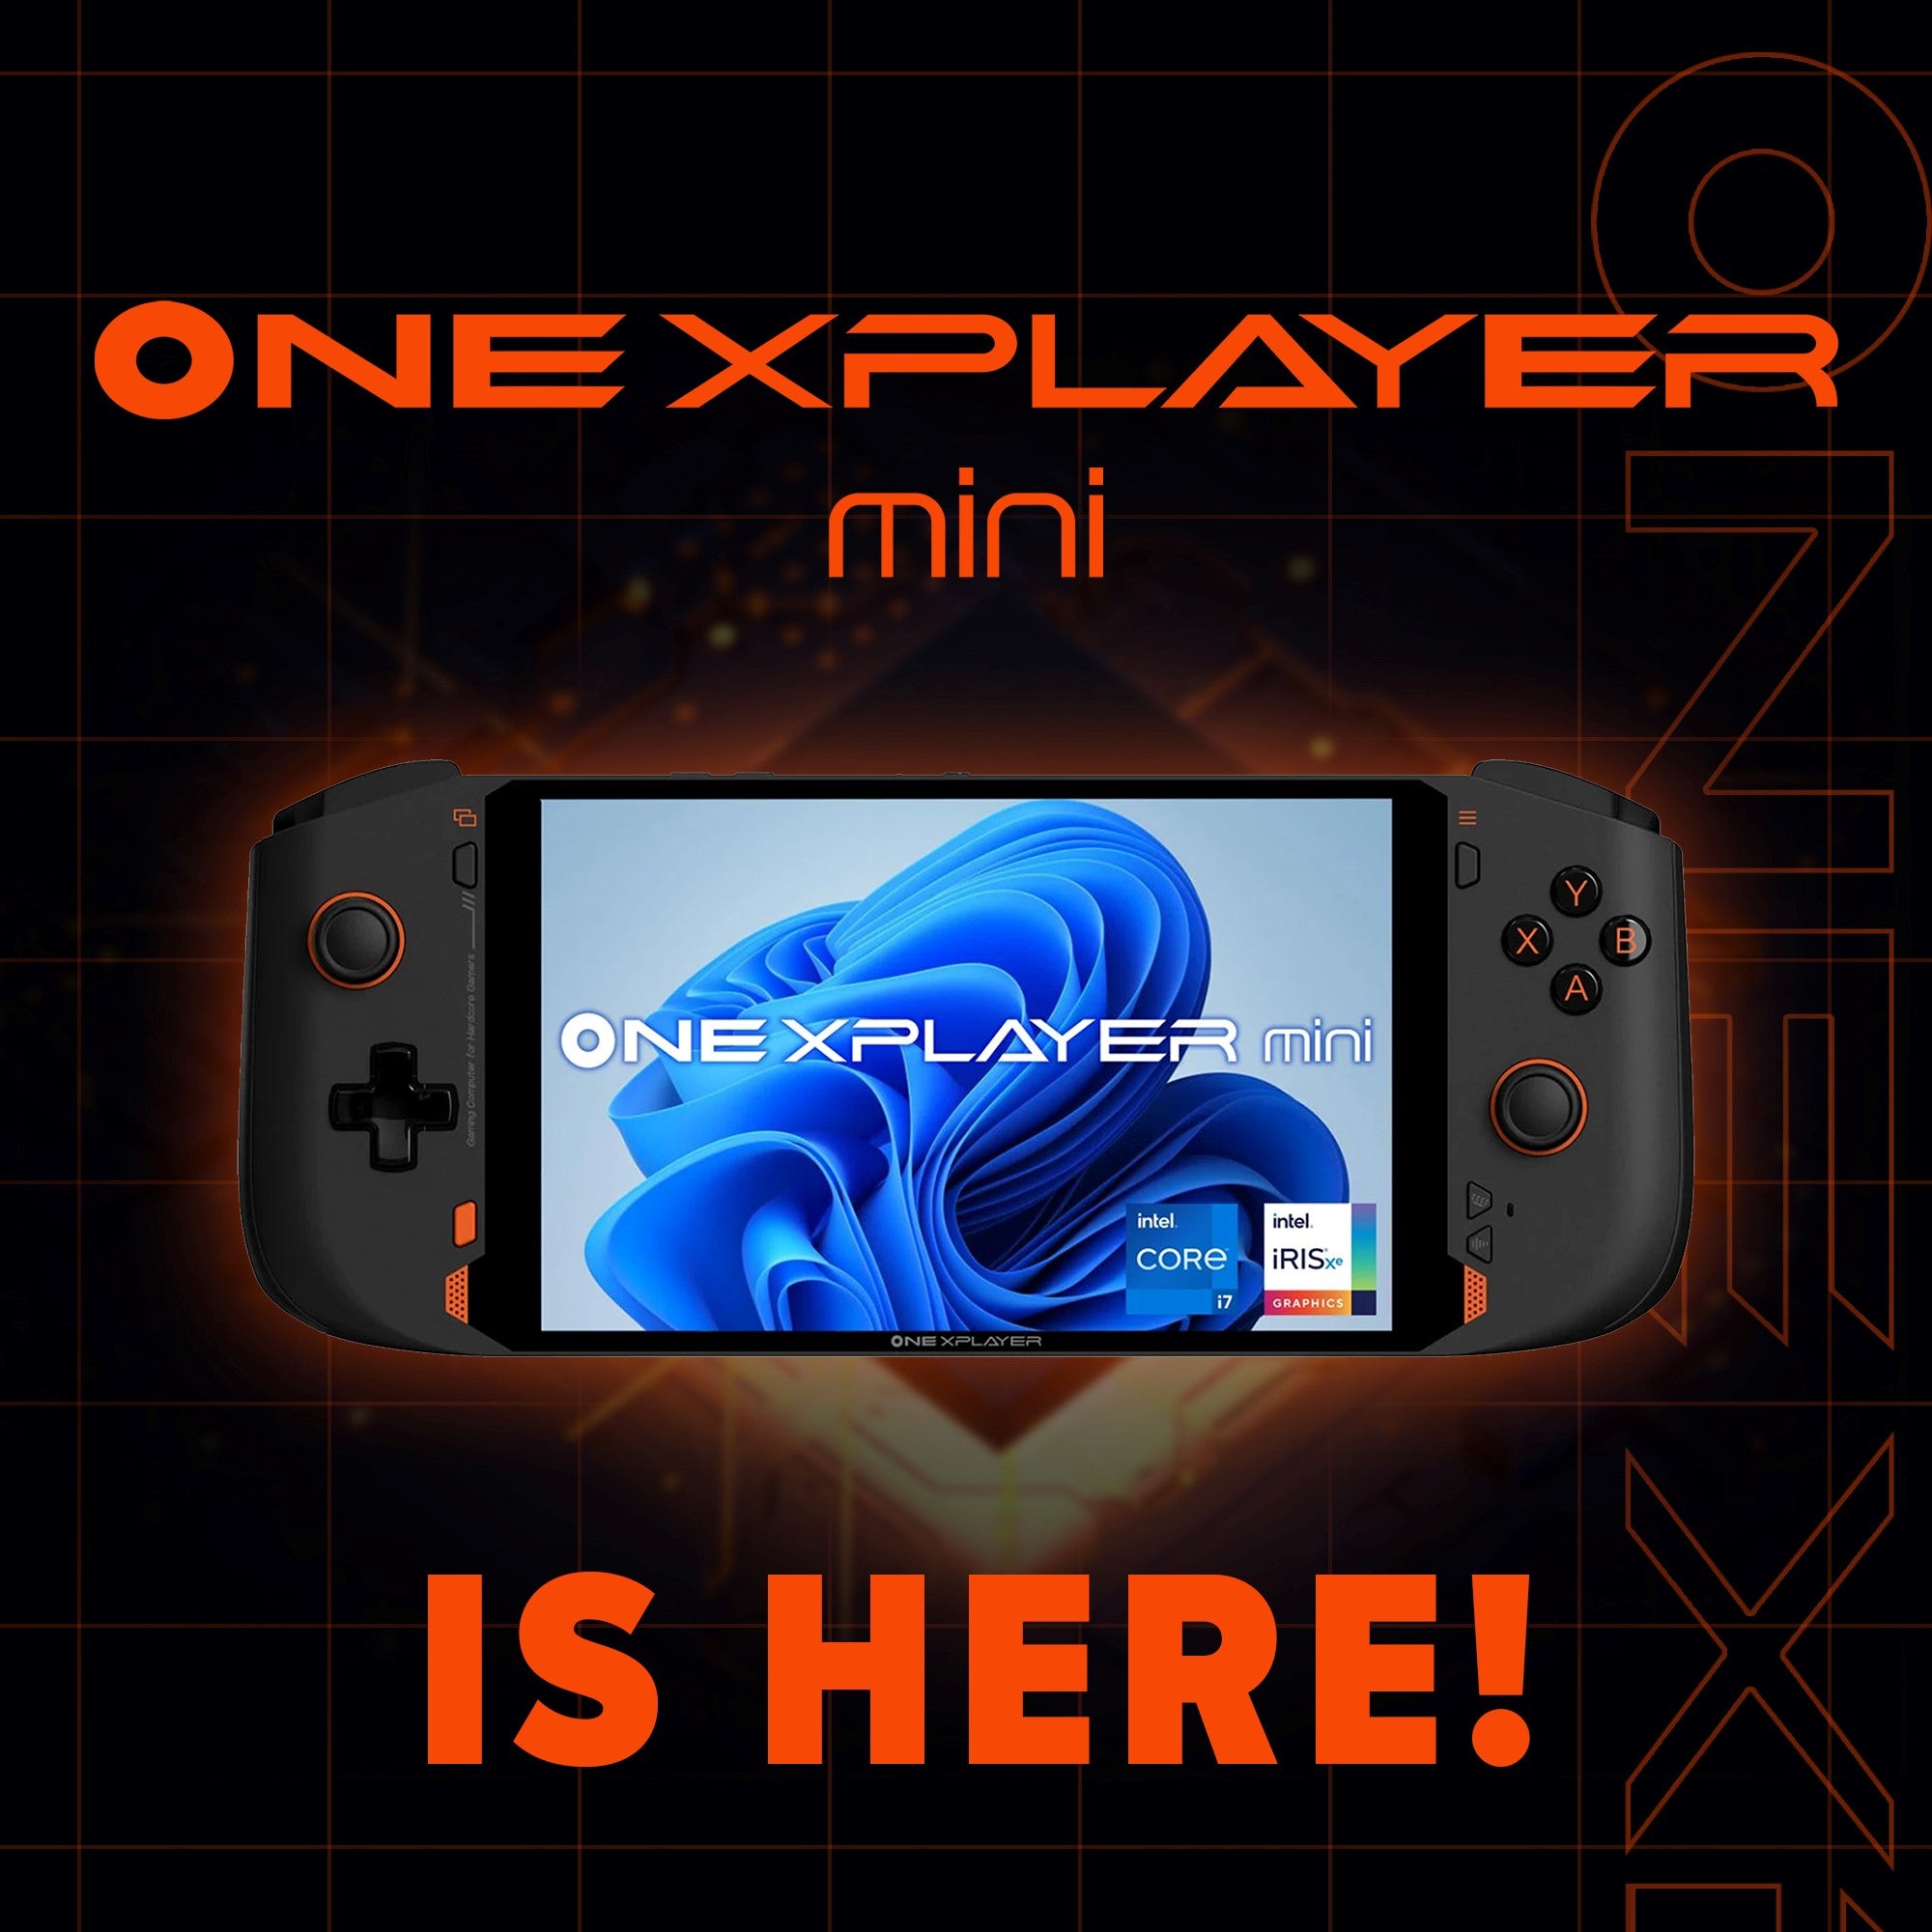 One XPlayer Mini is here, and it is the perfect device for gamers. Here's why.